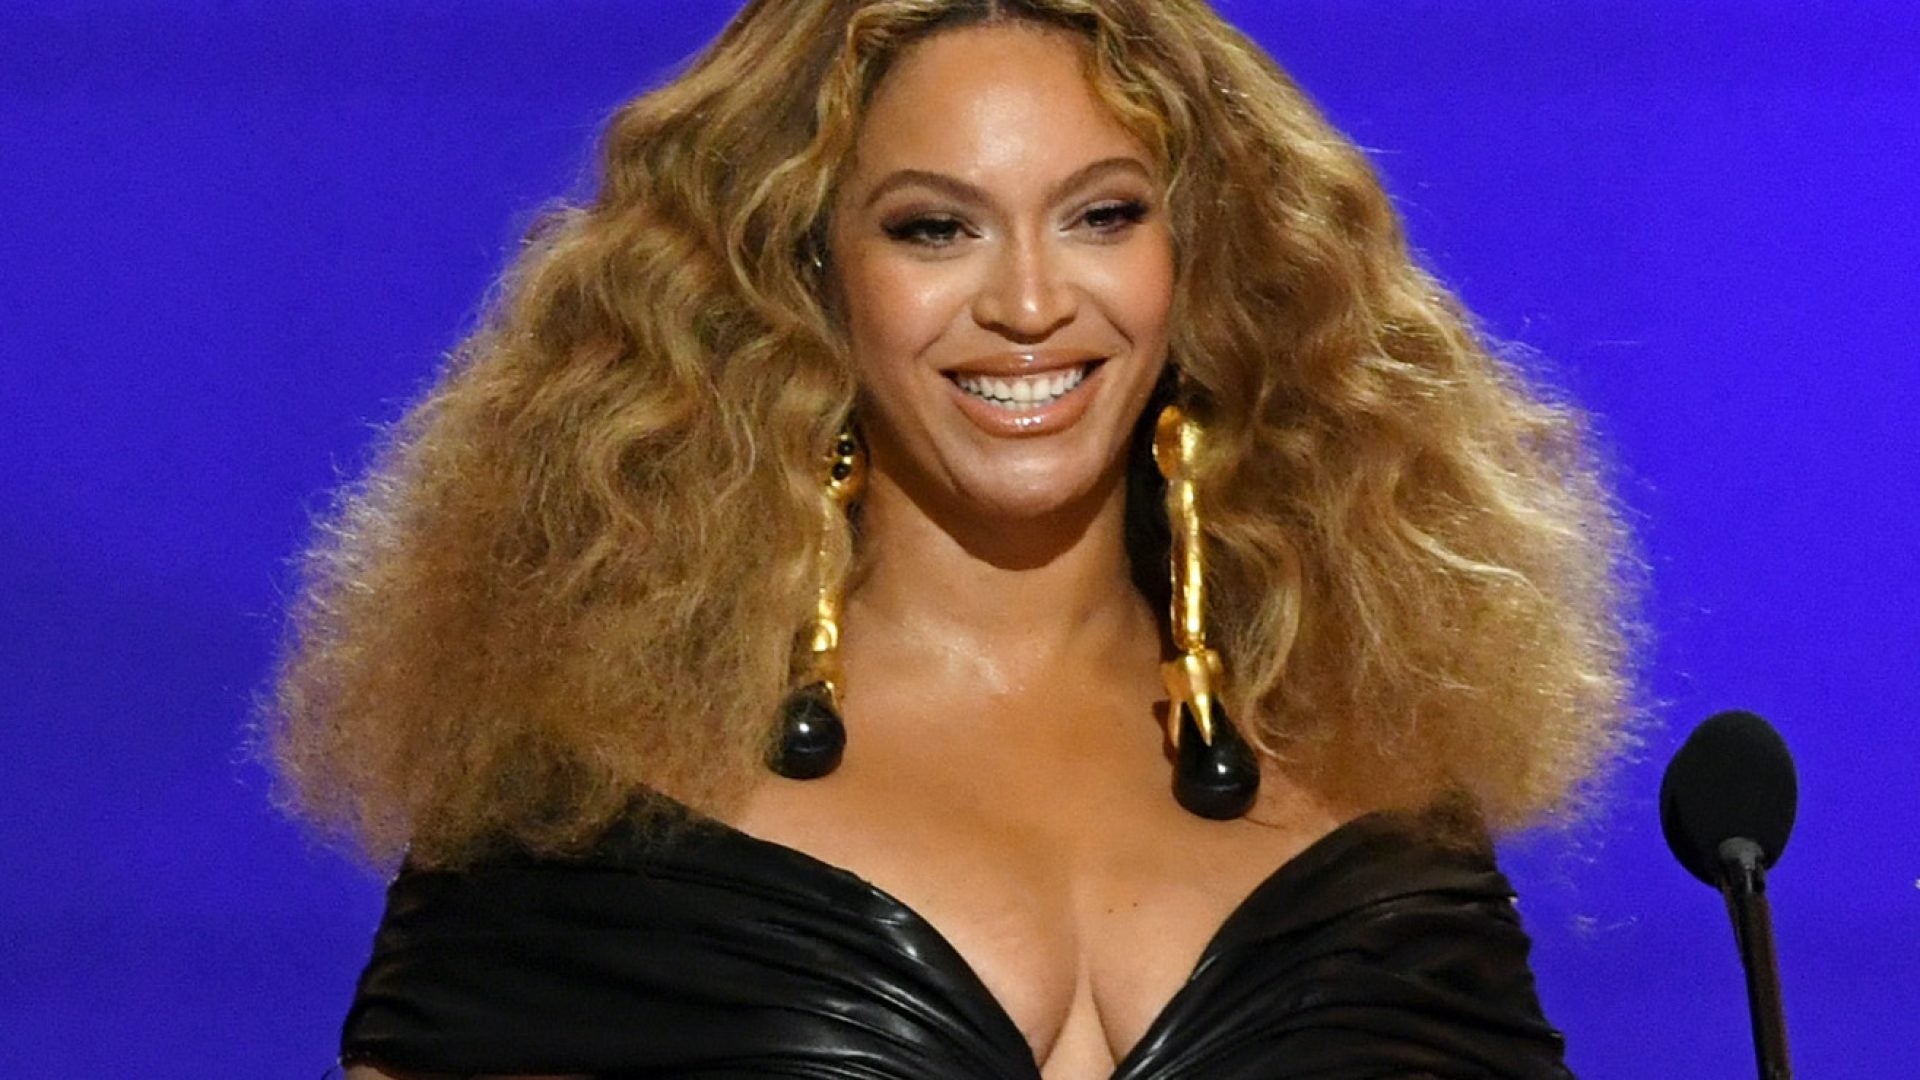 Beyoncé Named As Headline Act At The 94th Annual Academy Awards Ceremony